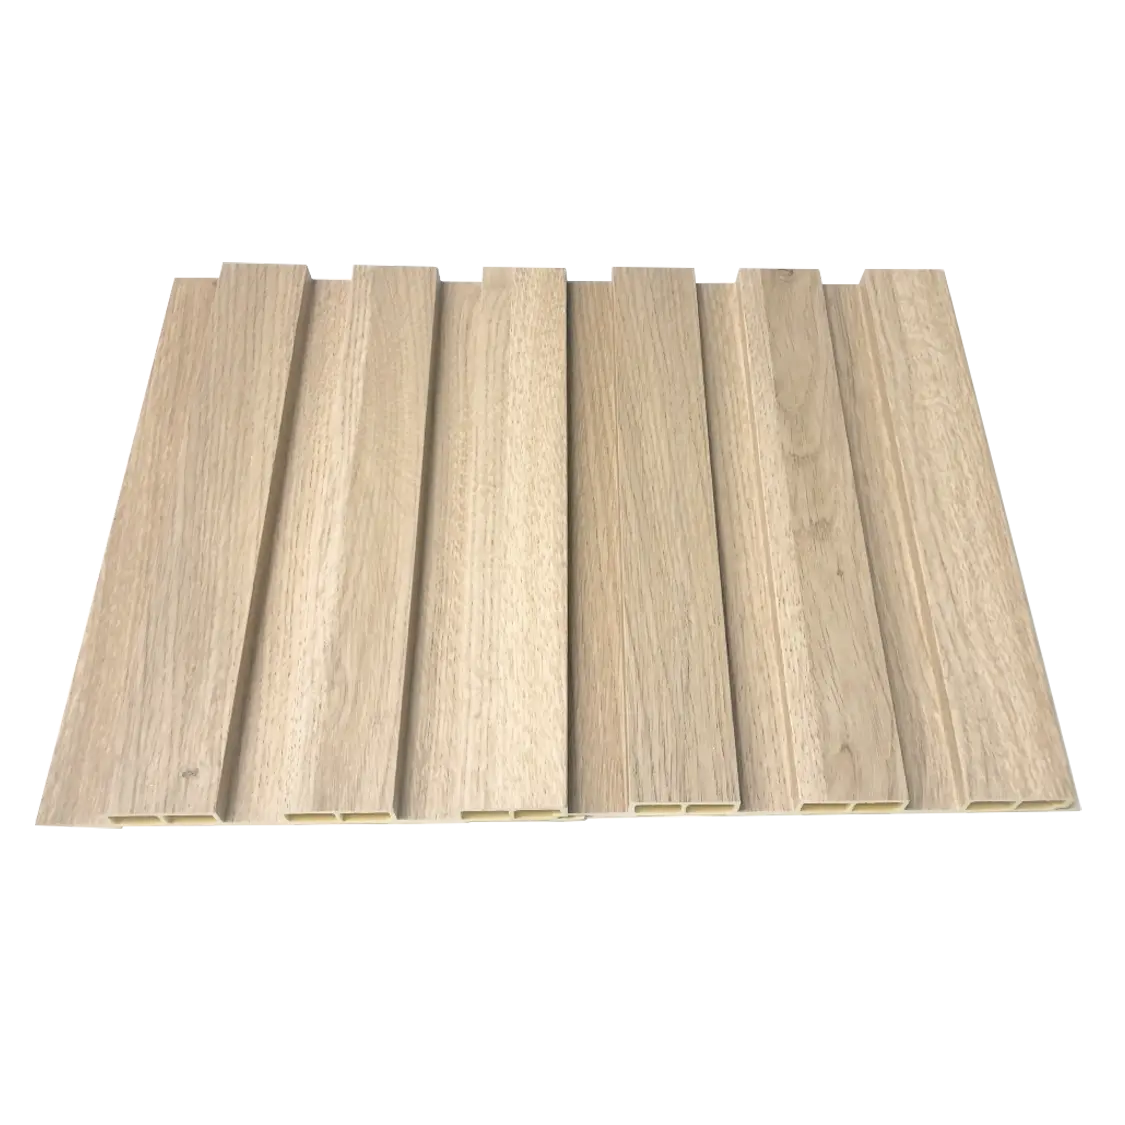 Gooday FALSE CEILING interior decor ceiling tiles board WPC sheets plastic covering PVC wood grain interior suspended ceiling